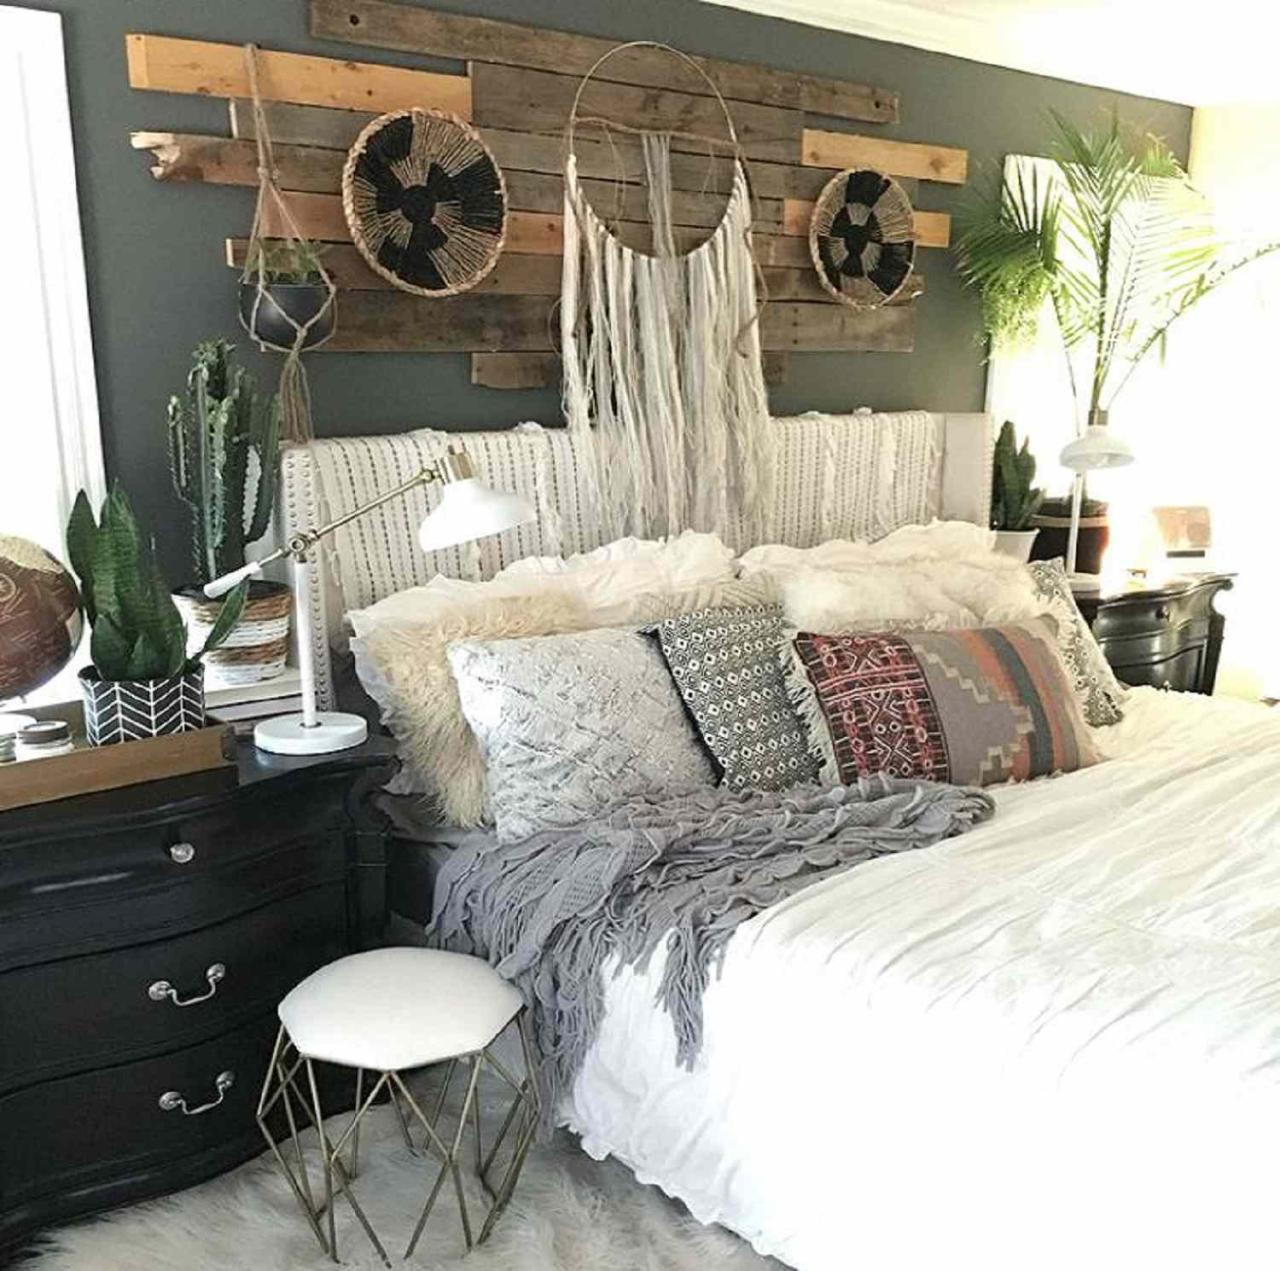 Boho Chic Retreat: Relaxed and Inviting Bedroom Style